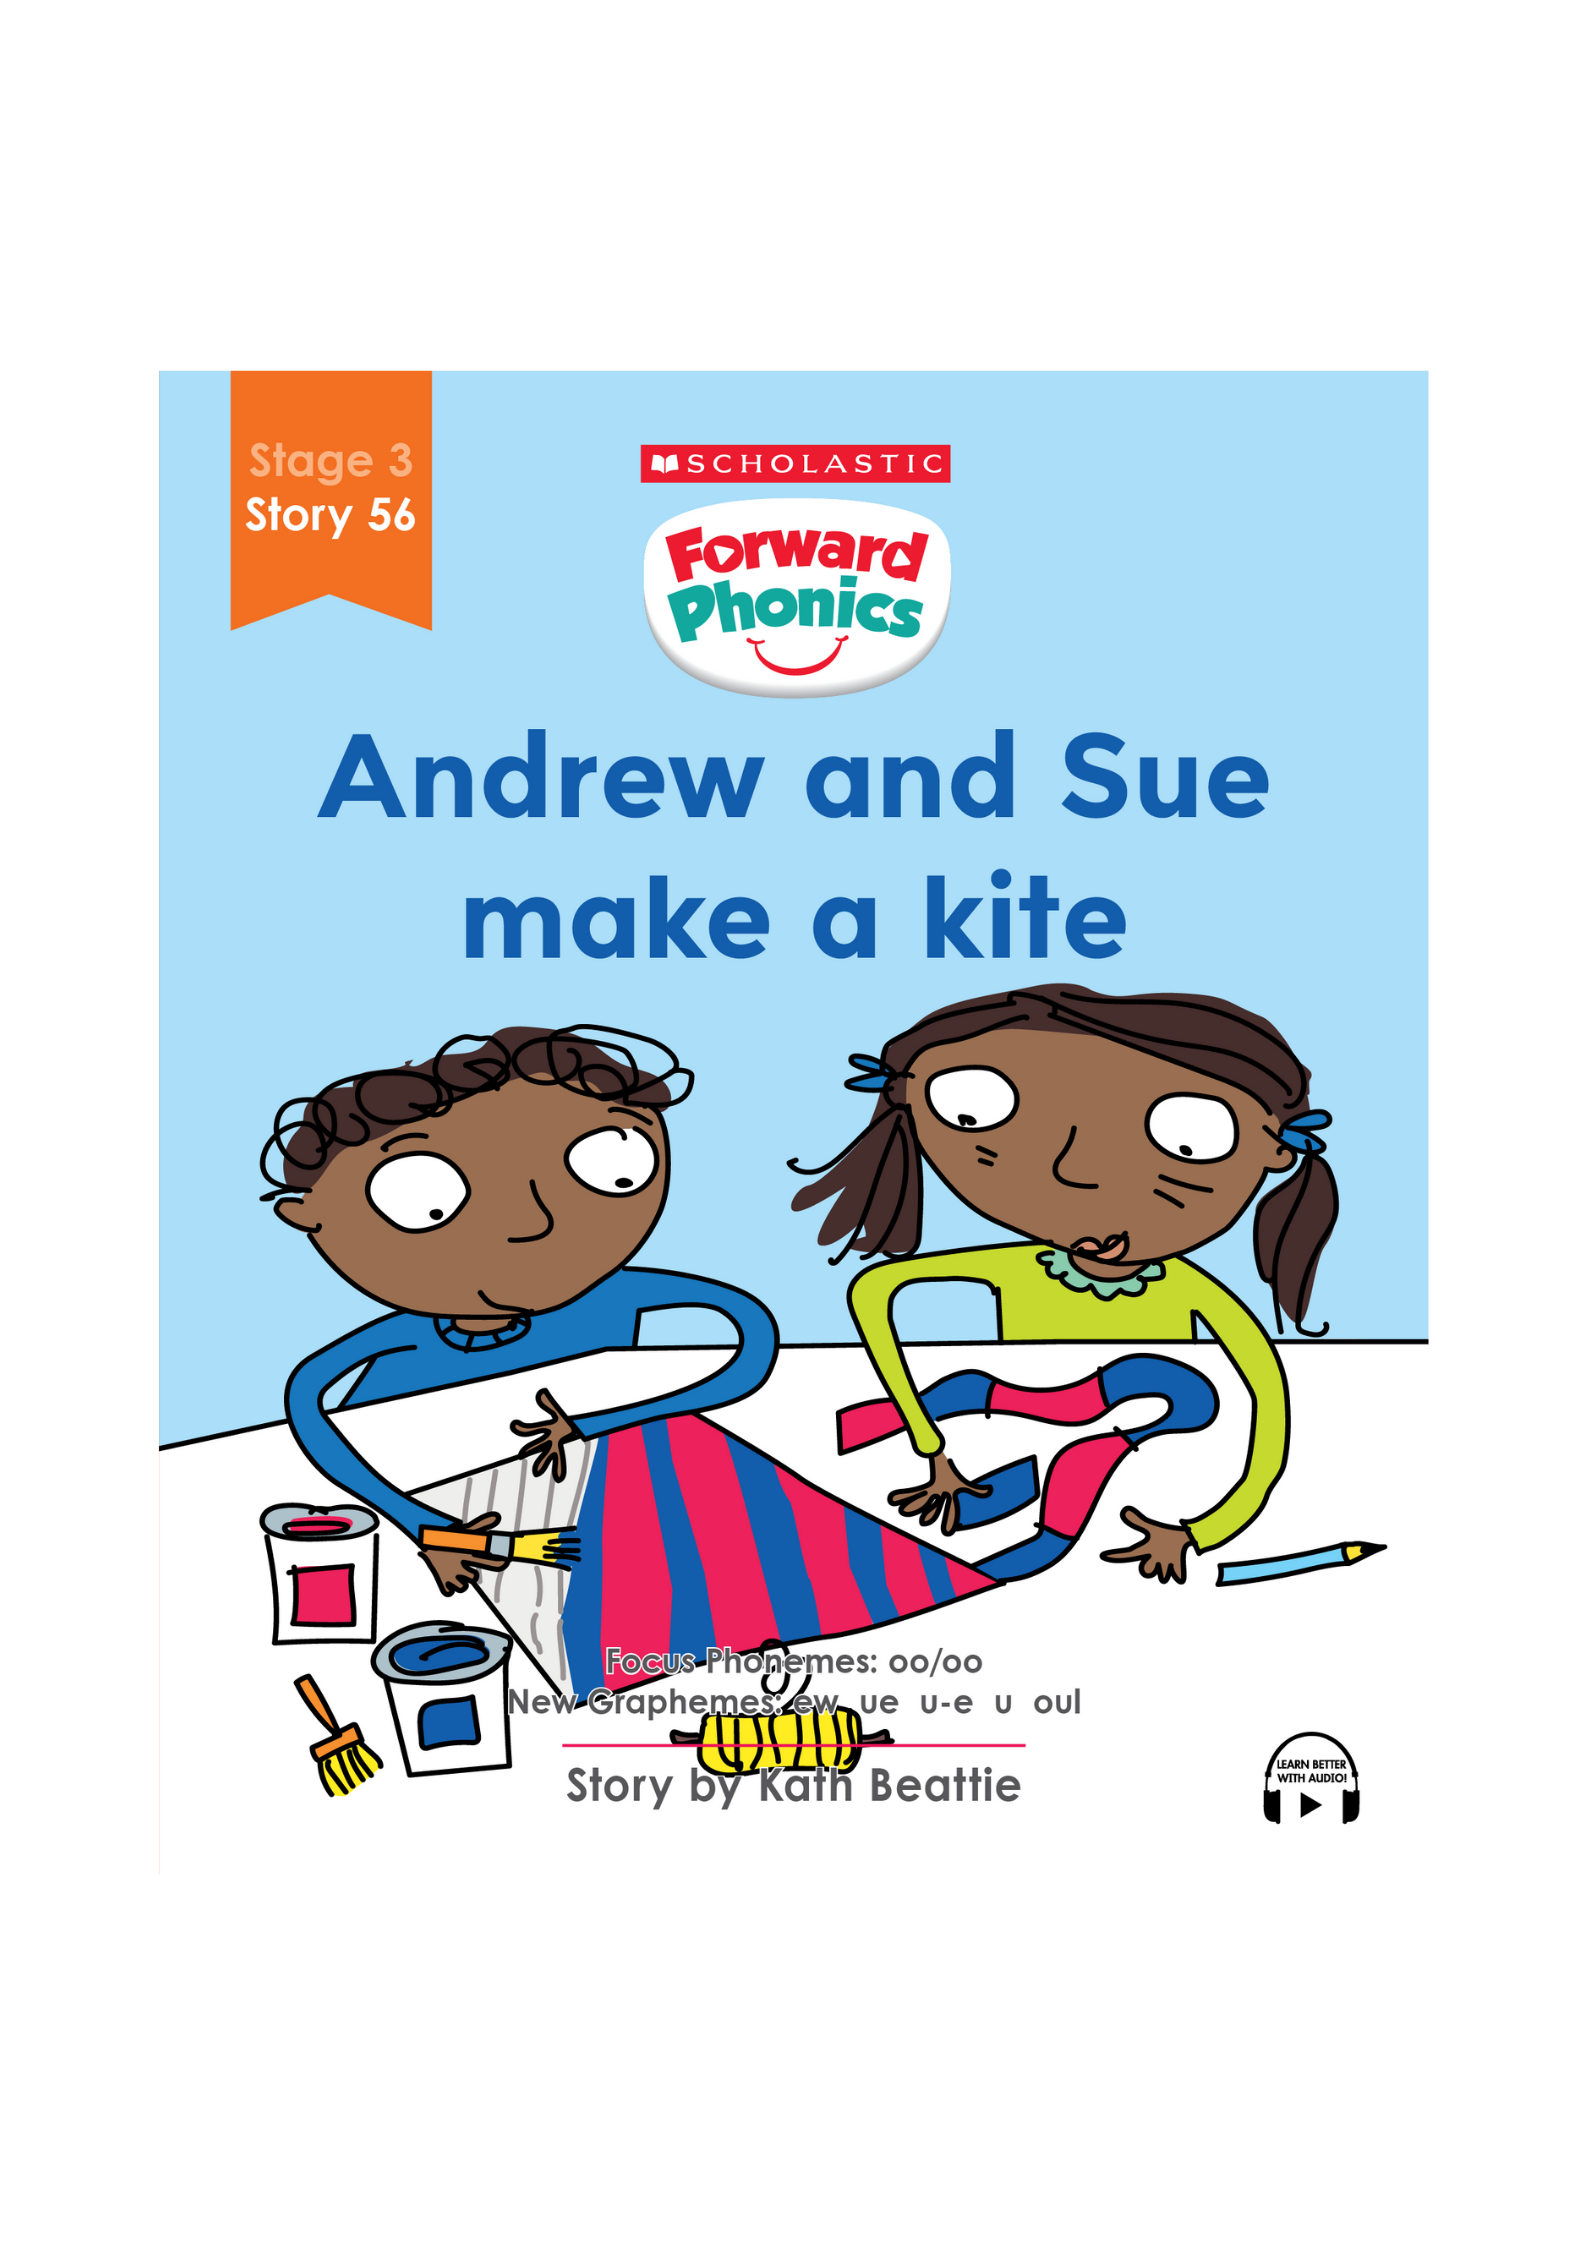 Forward Phonics #56: Andrew and Sue Make a Kite